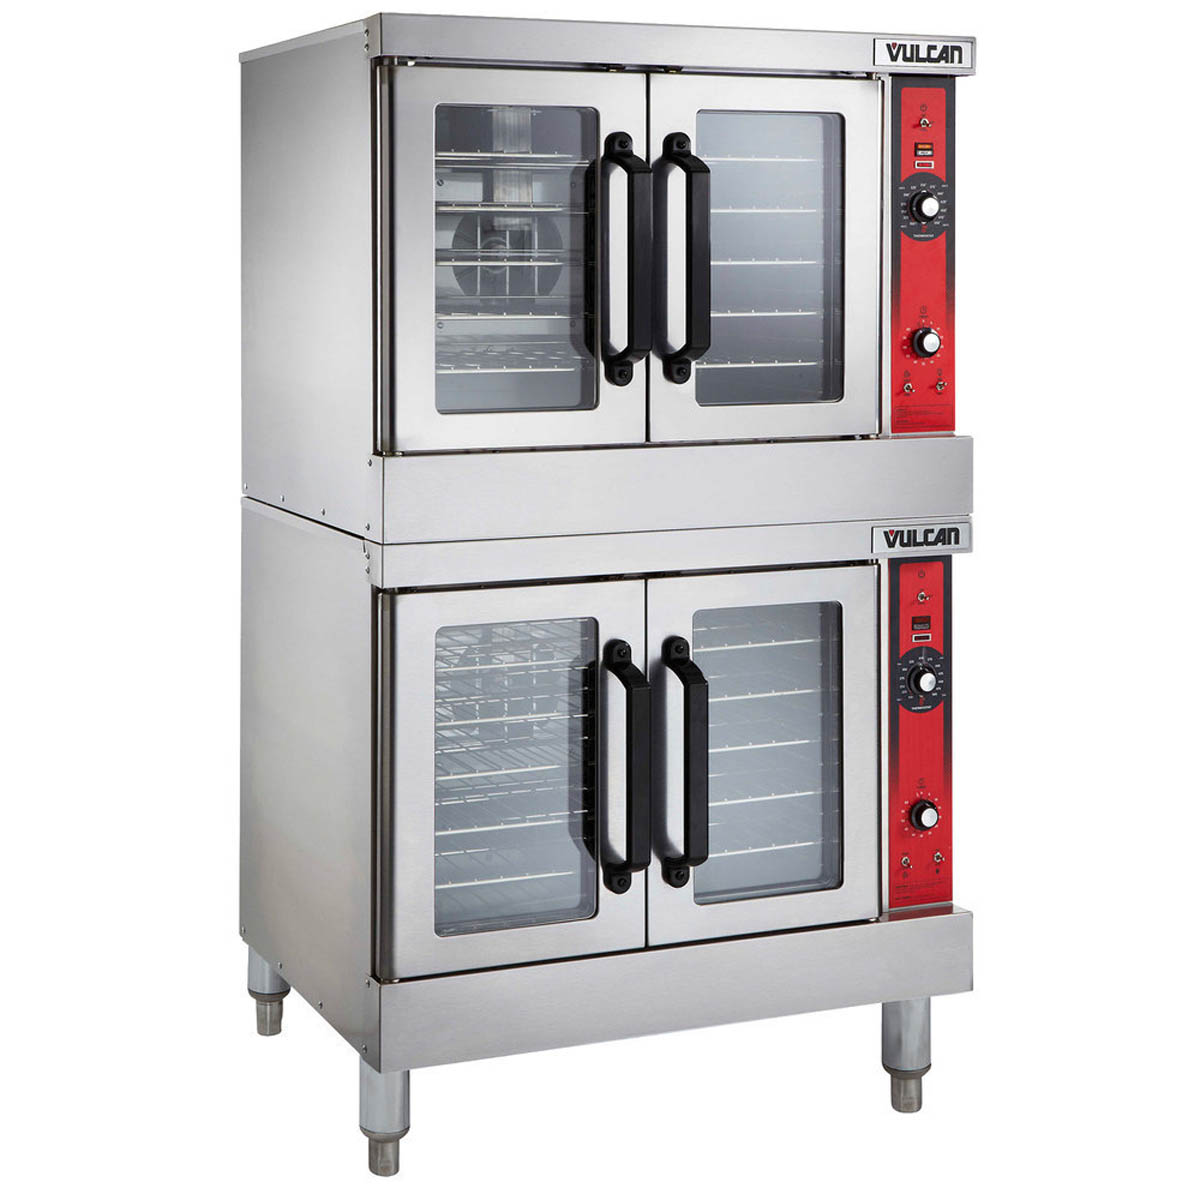 Vulcan VC55GD DOUBLE DECK GAS CONVECTION OVEN WITH REMOVABLE DOORS